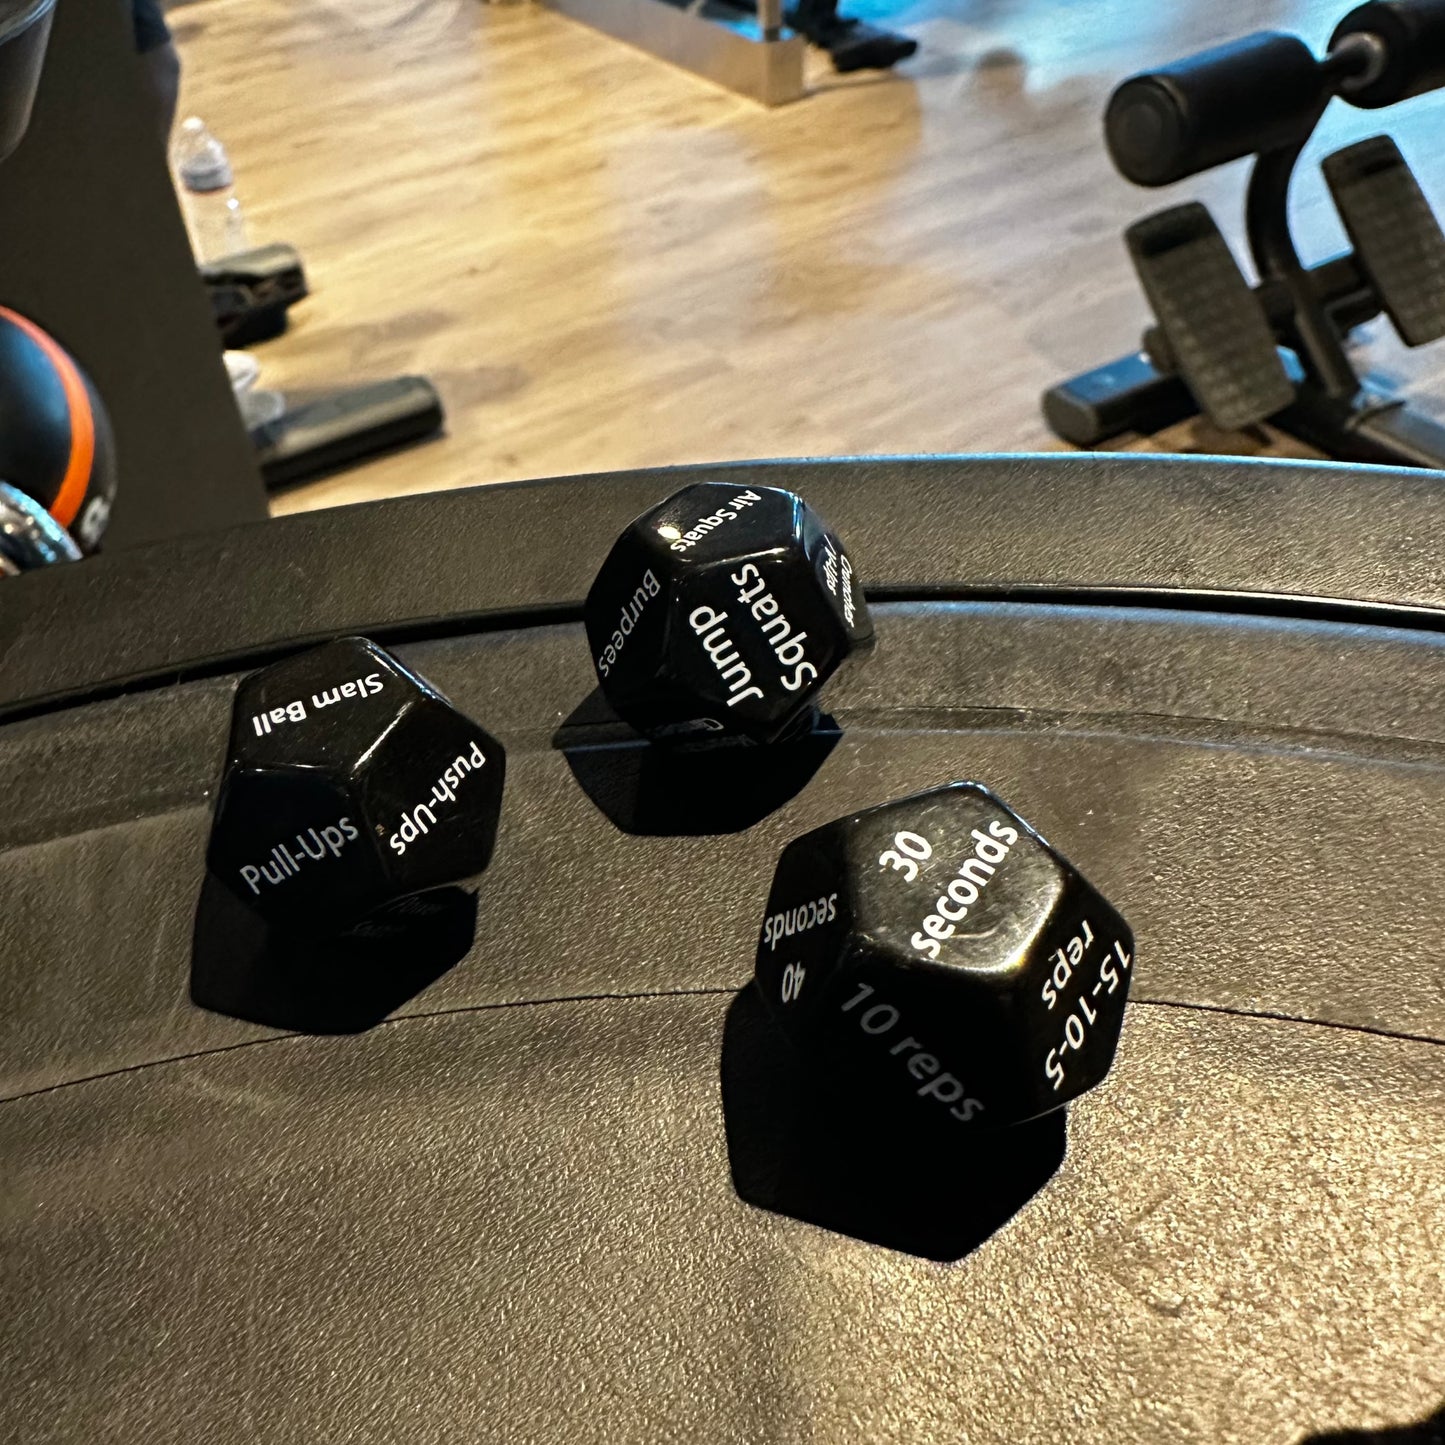 WODFitters Workout Dice Set for Constantly Varied Workouts